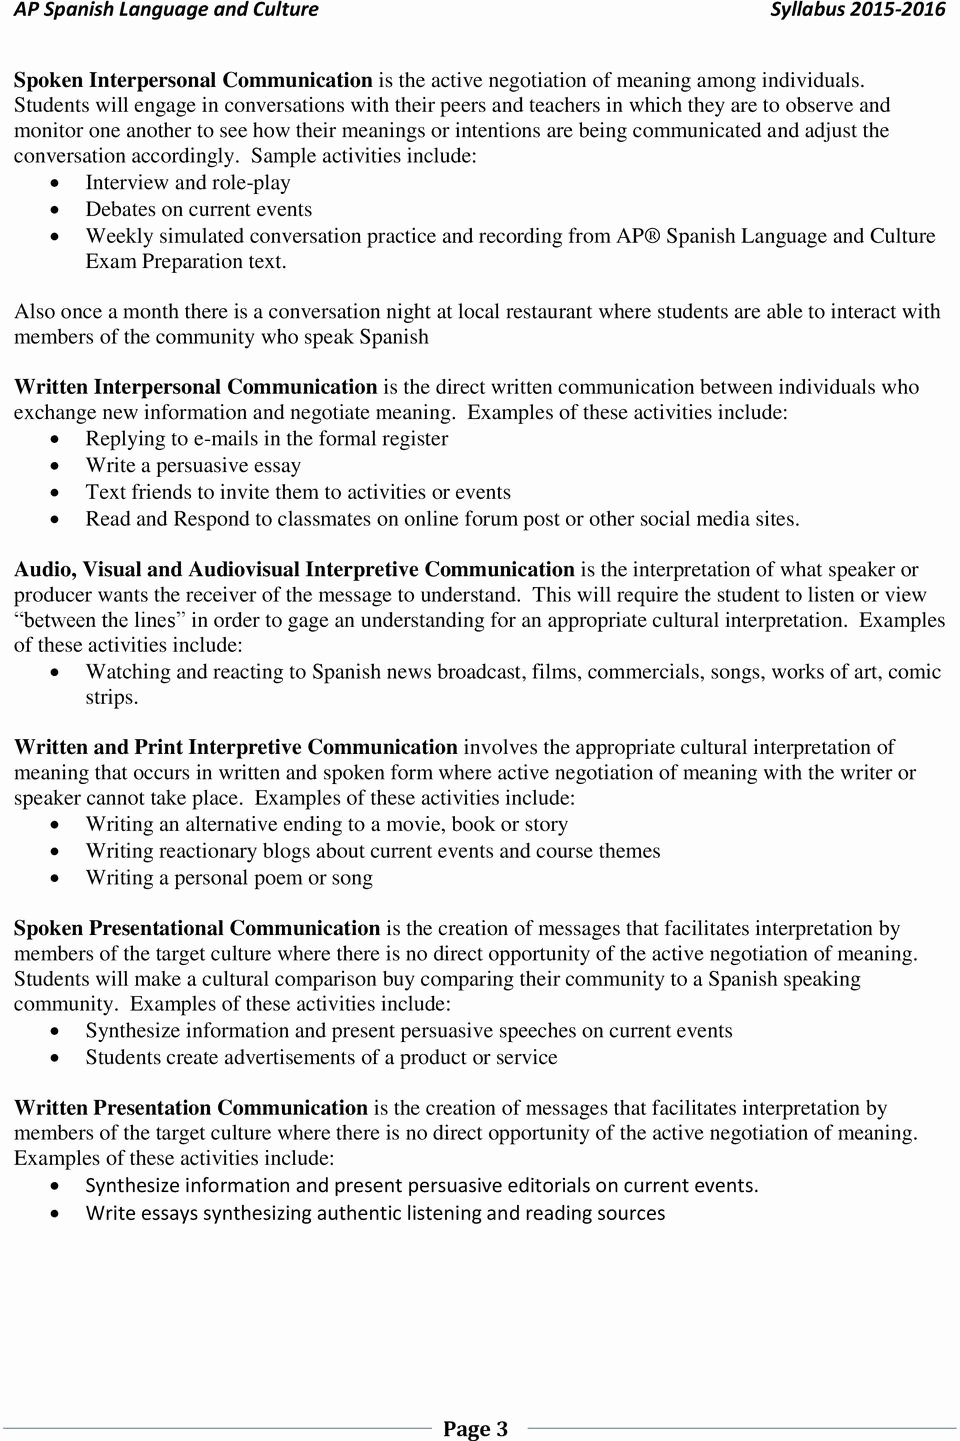 Current event Paper Sample Awesome Ap Spanish Language and Culture Syllabus Pdf